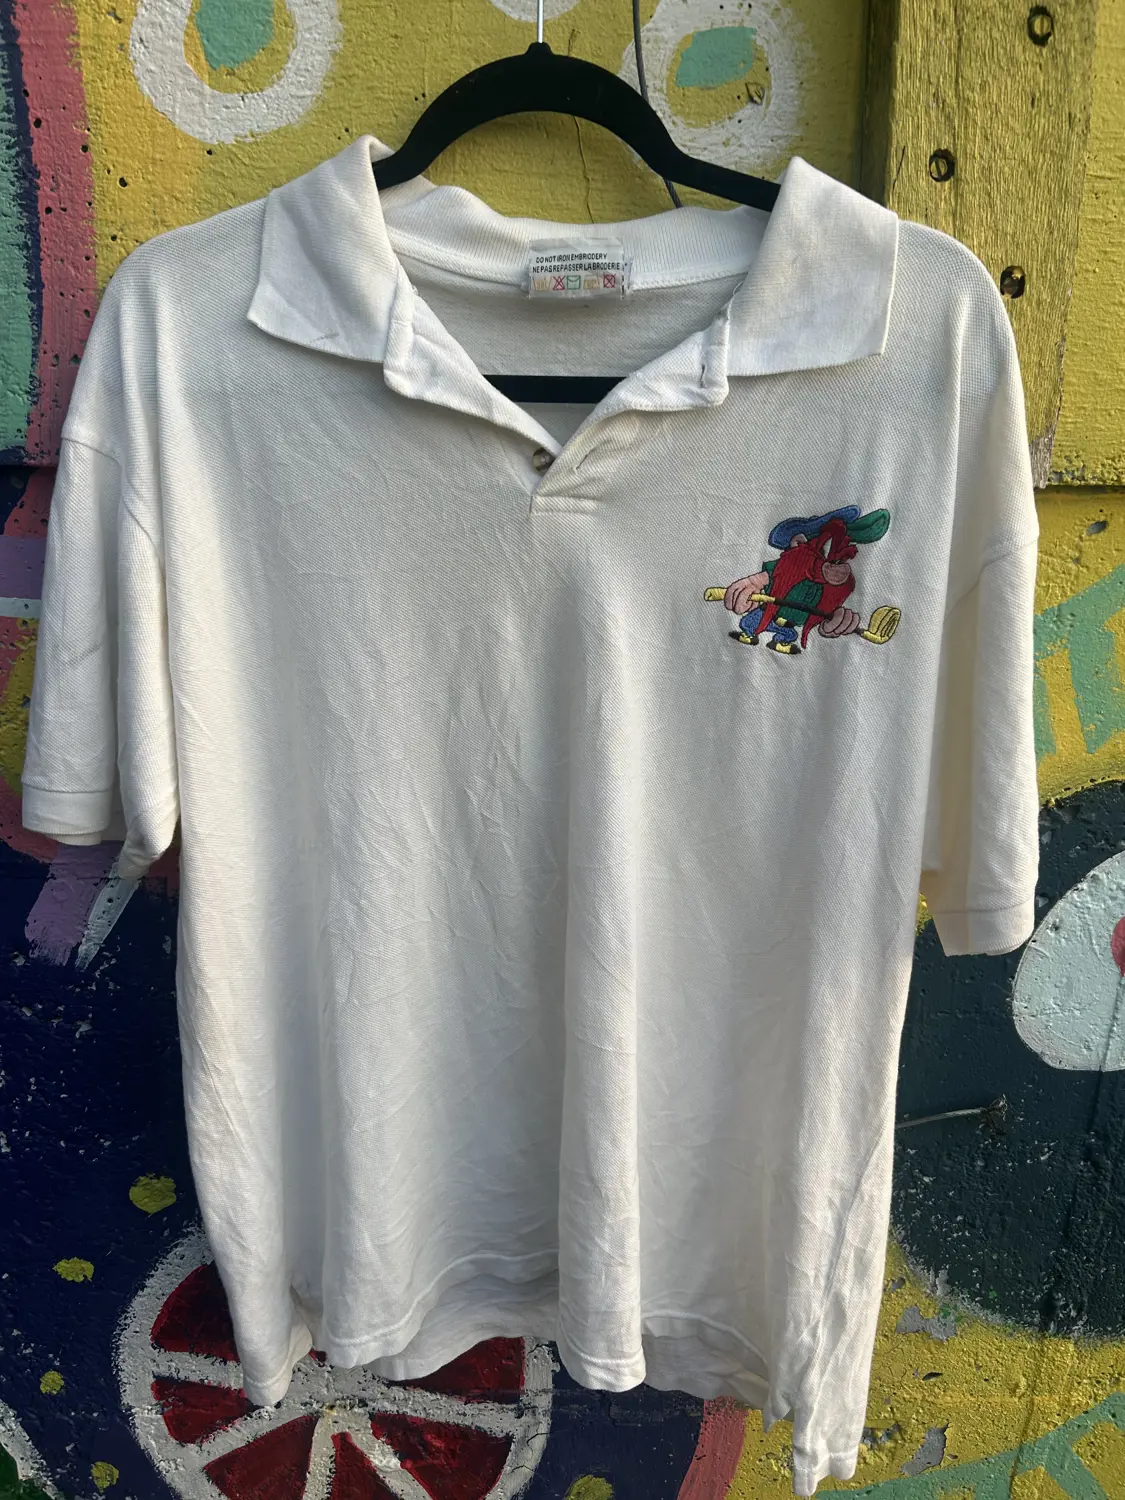 Vintage Looney Tunes Collared shirt